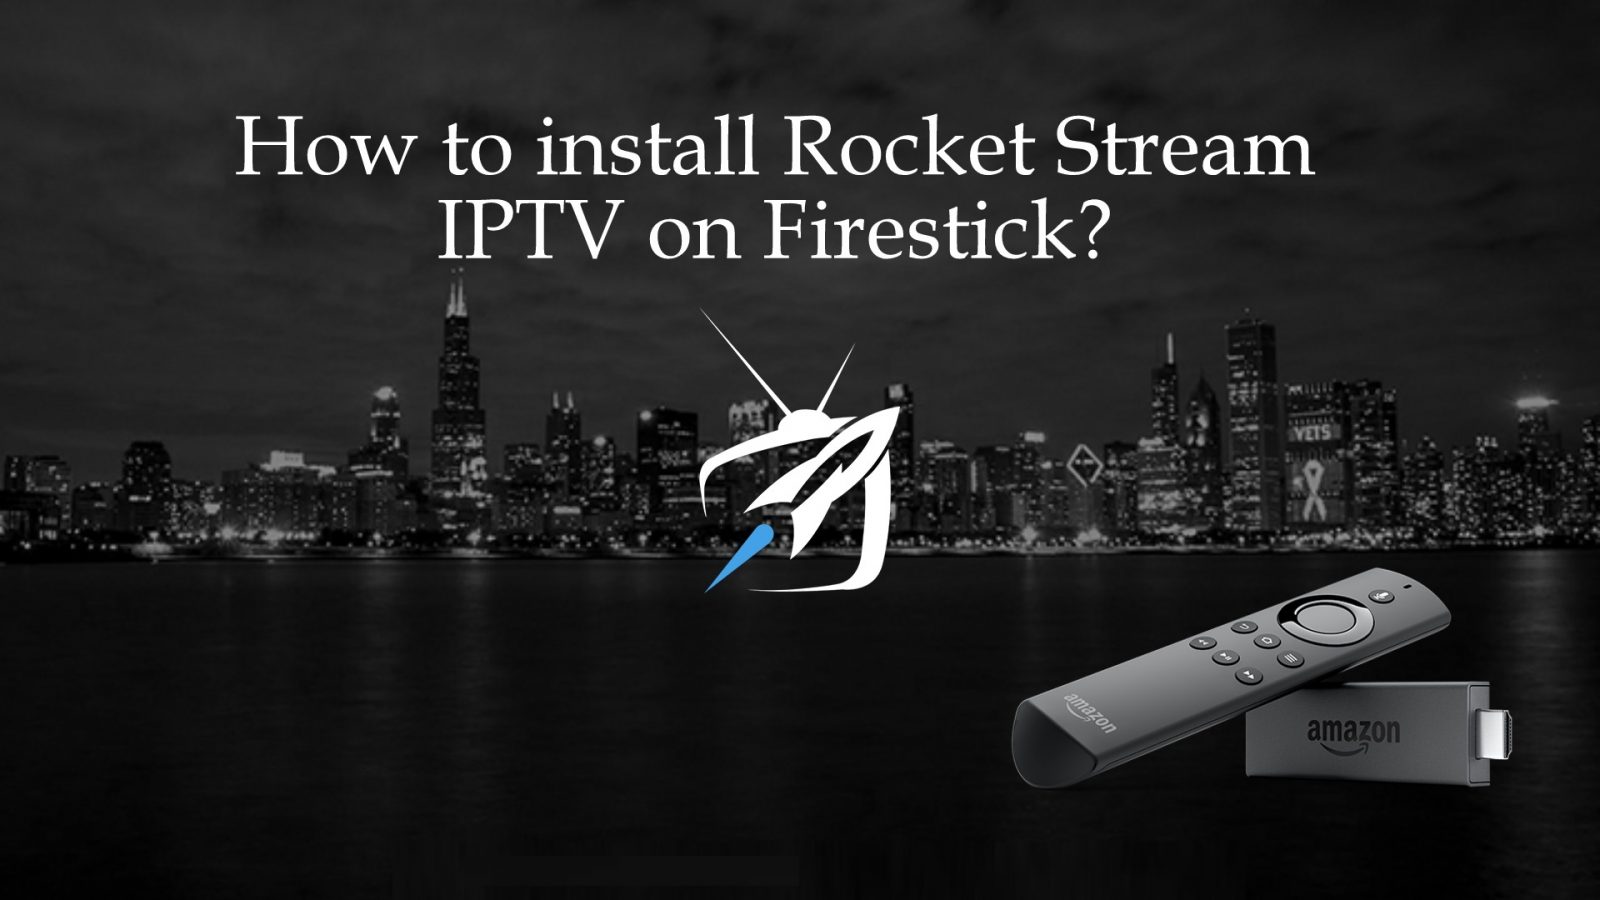 How to Install Rocket IPTV for Firestick